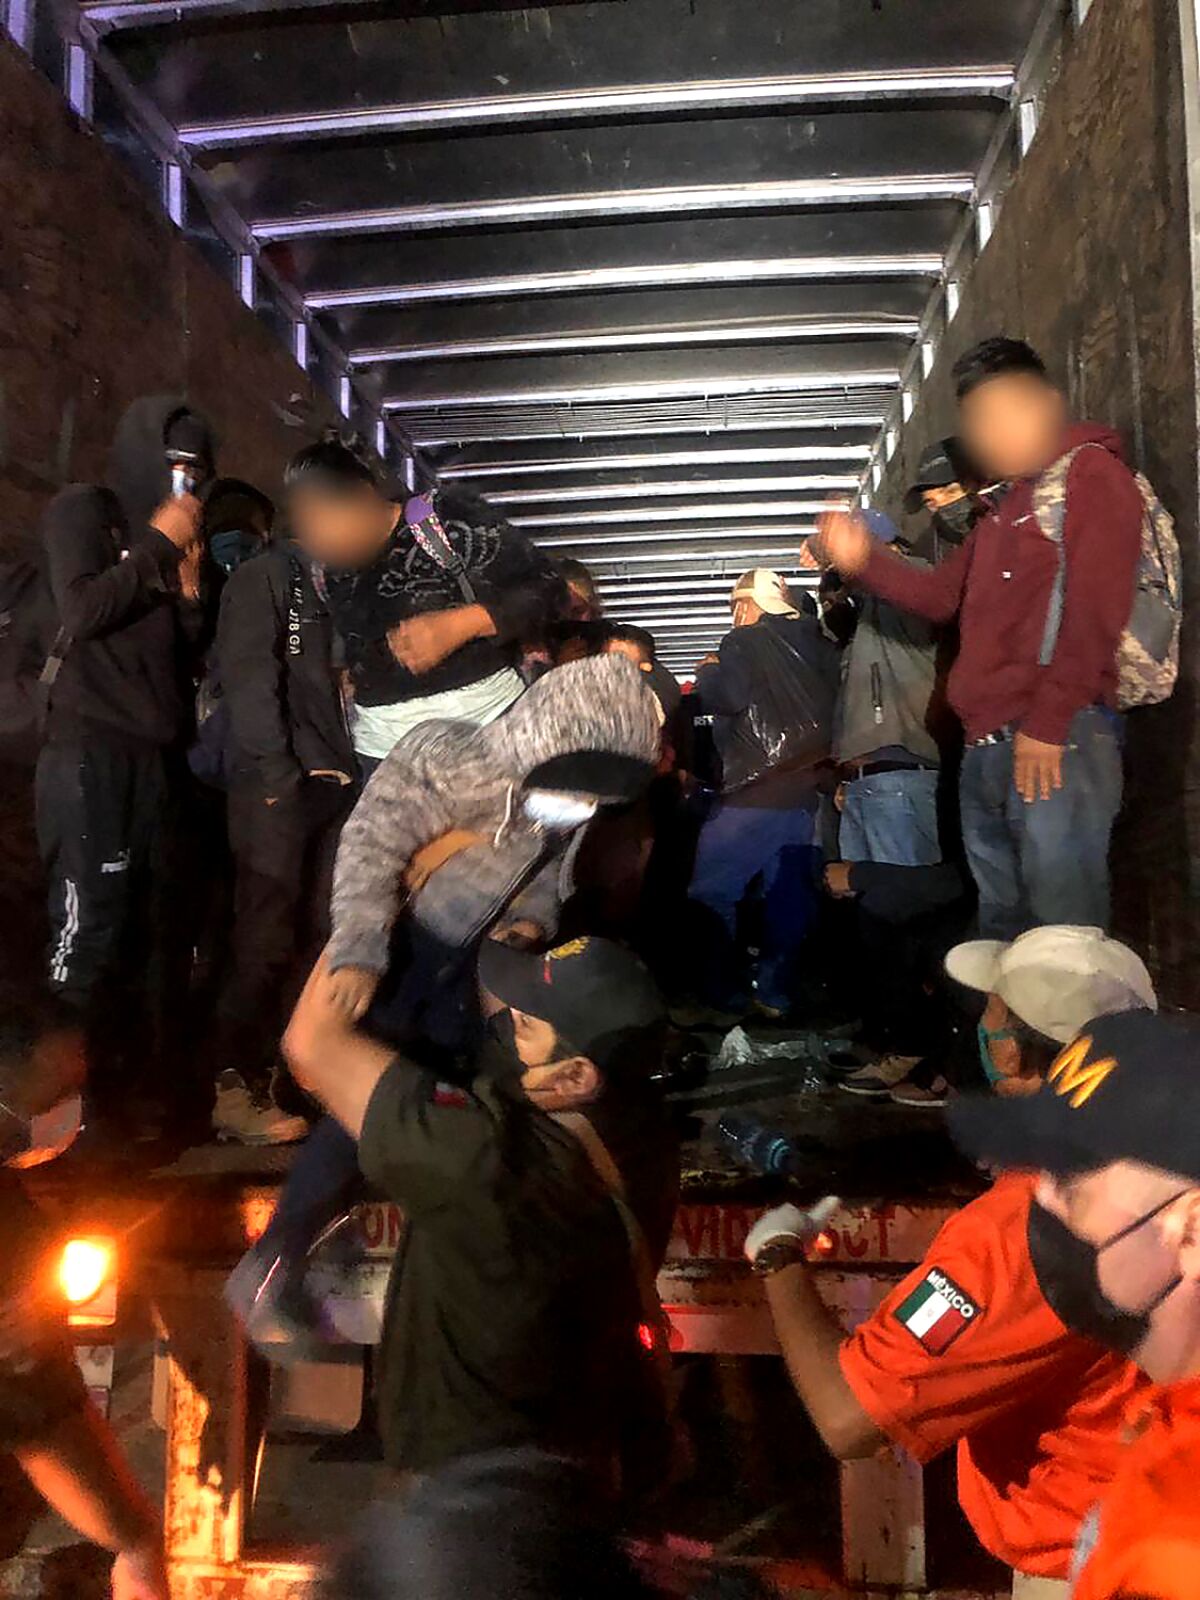 Police rescue 201 migrants in the back of a big rig in Mexico's southern Chiapas state